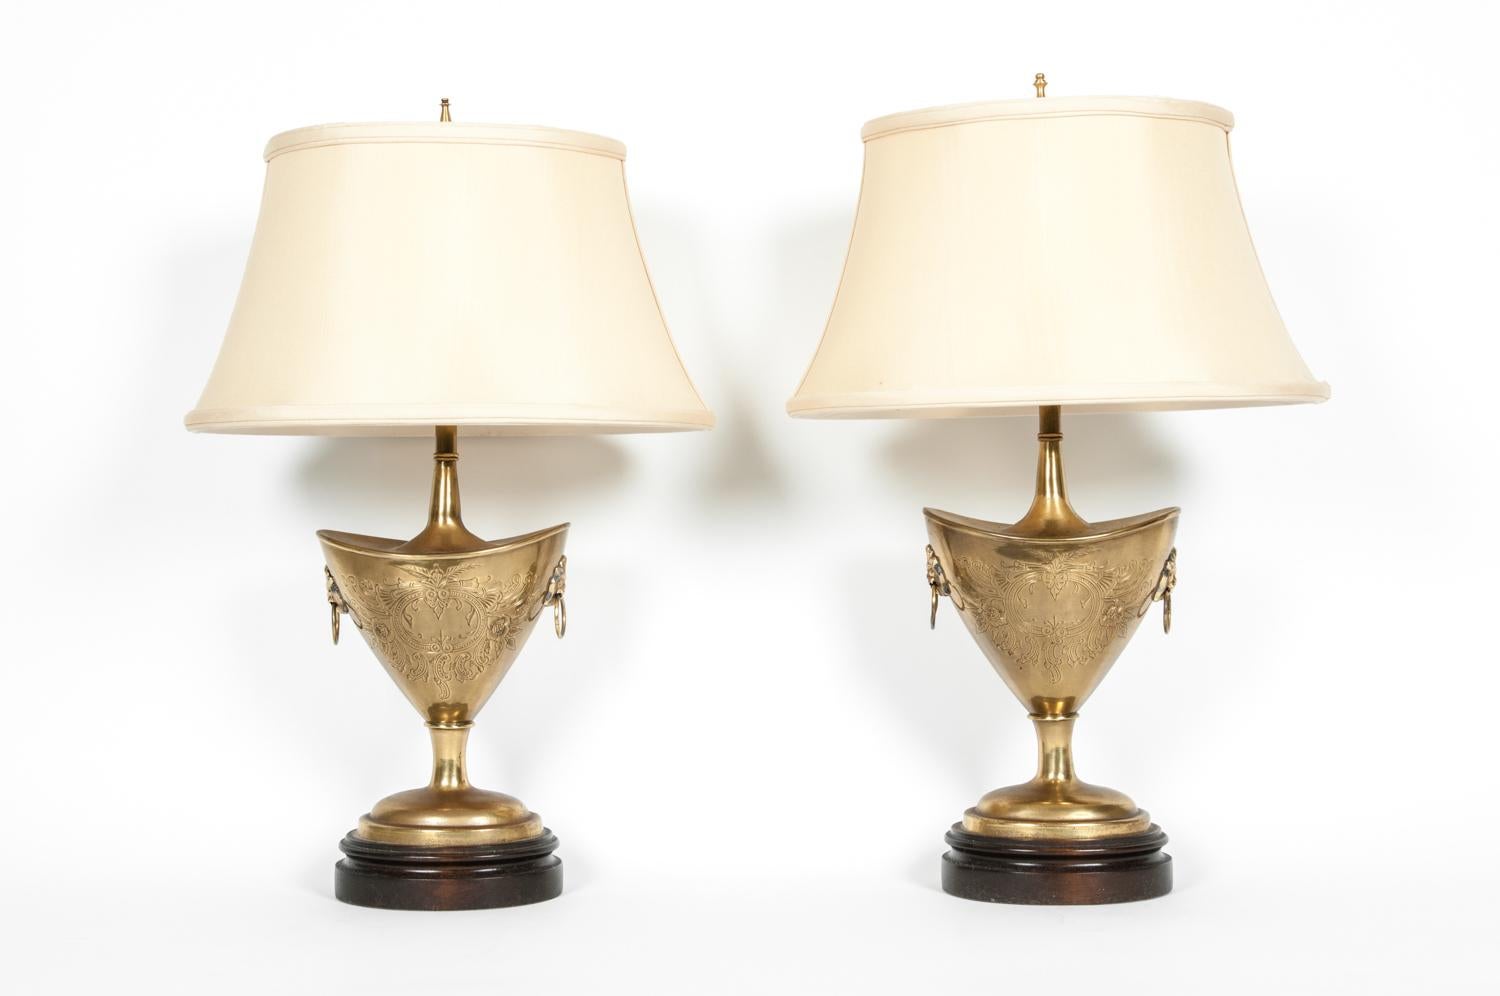 North American Vintage Brass with Wood Base Pair of Table Lamps